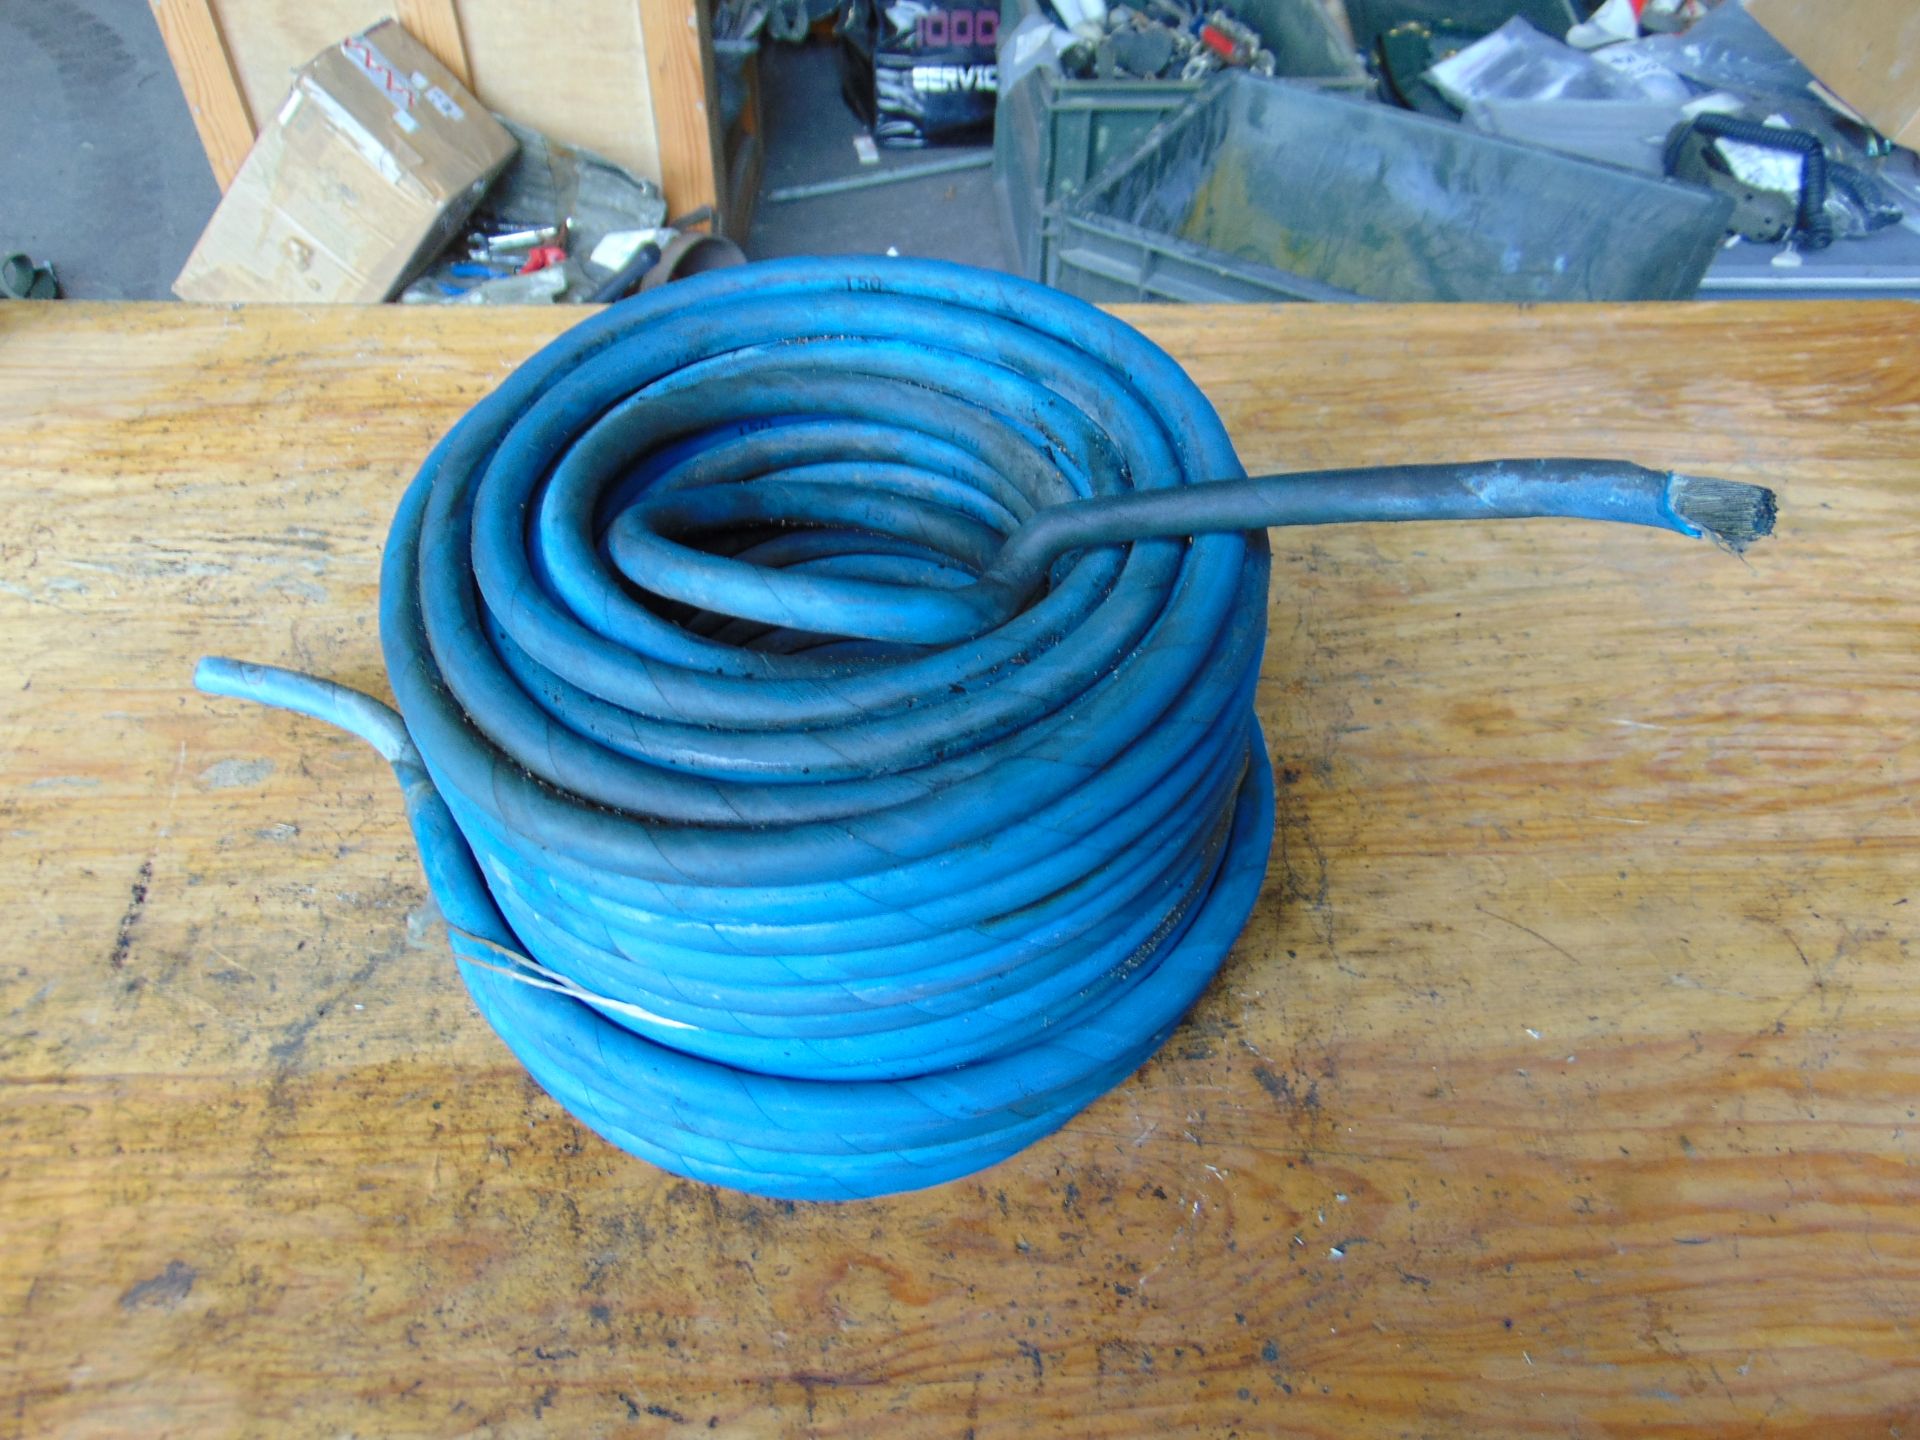 Unissued NOS Roll of HD Electrical Cable - Image 2 of 3